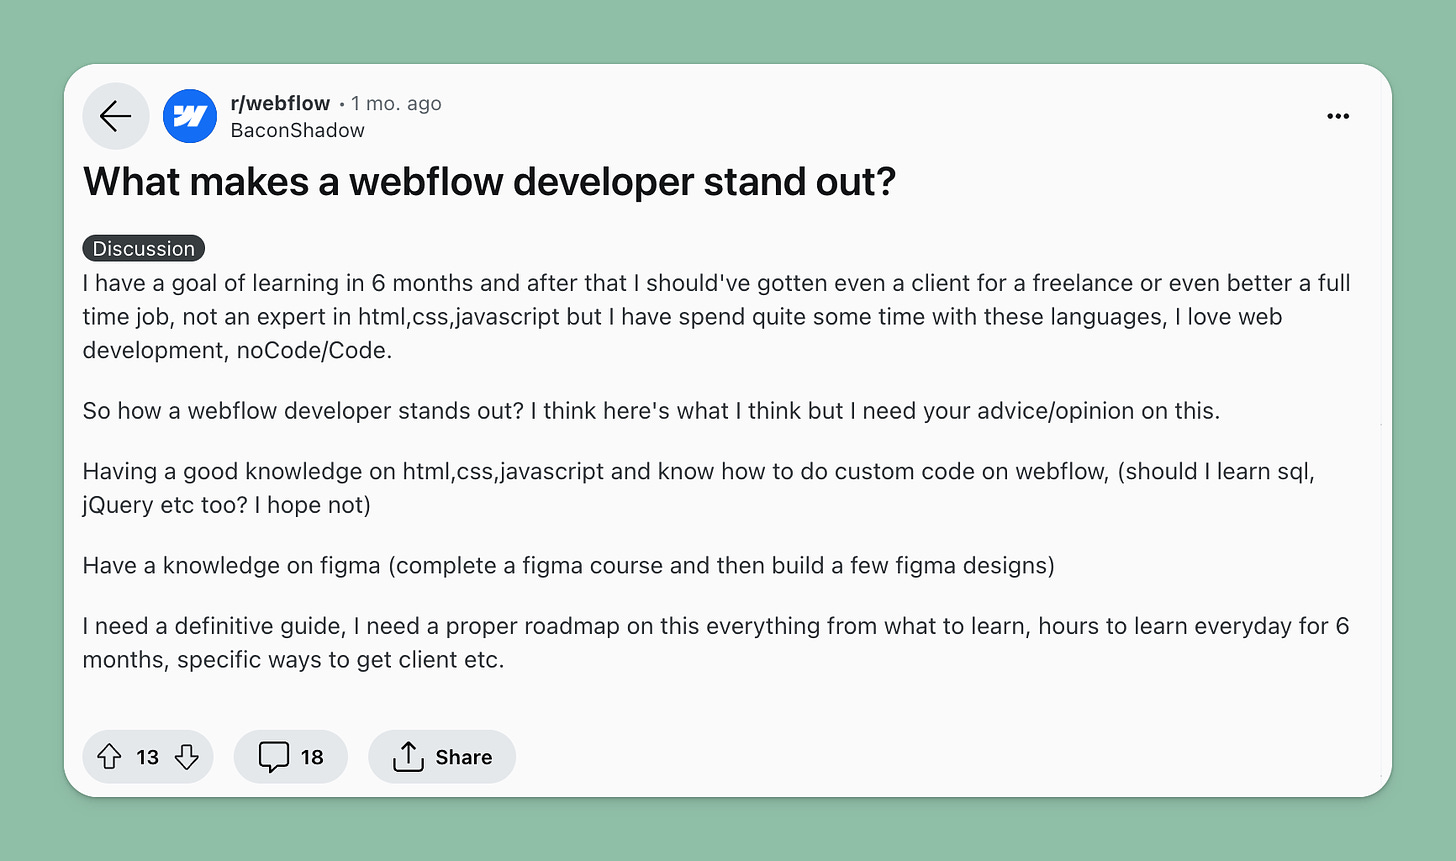 Screenshot from the Webflow subreddit with the question: 'What makes a webflow developer stand out?'